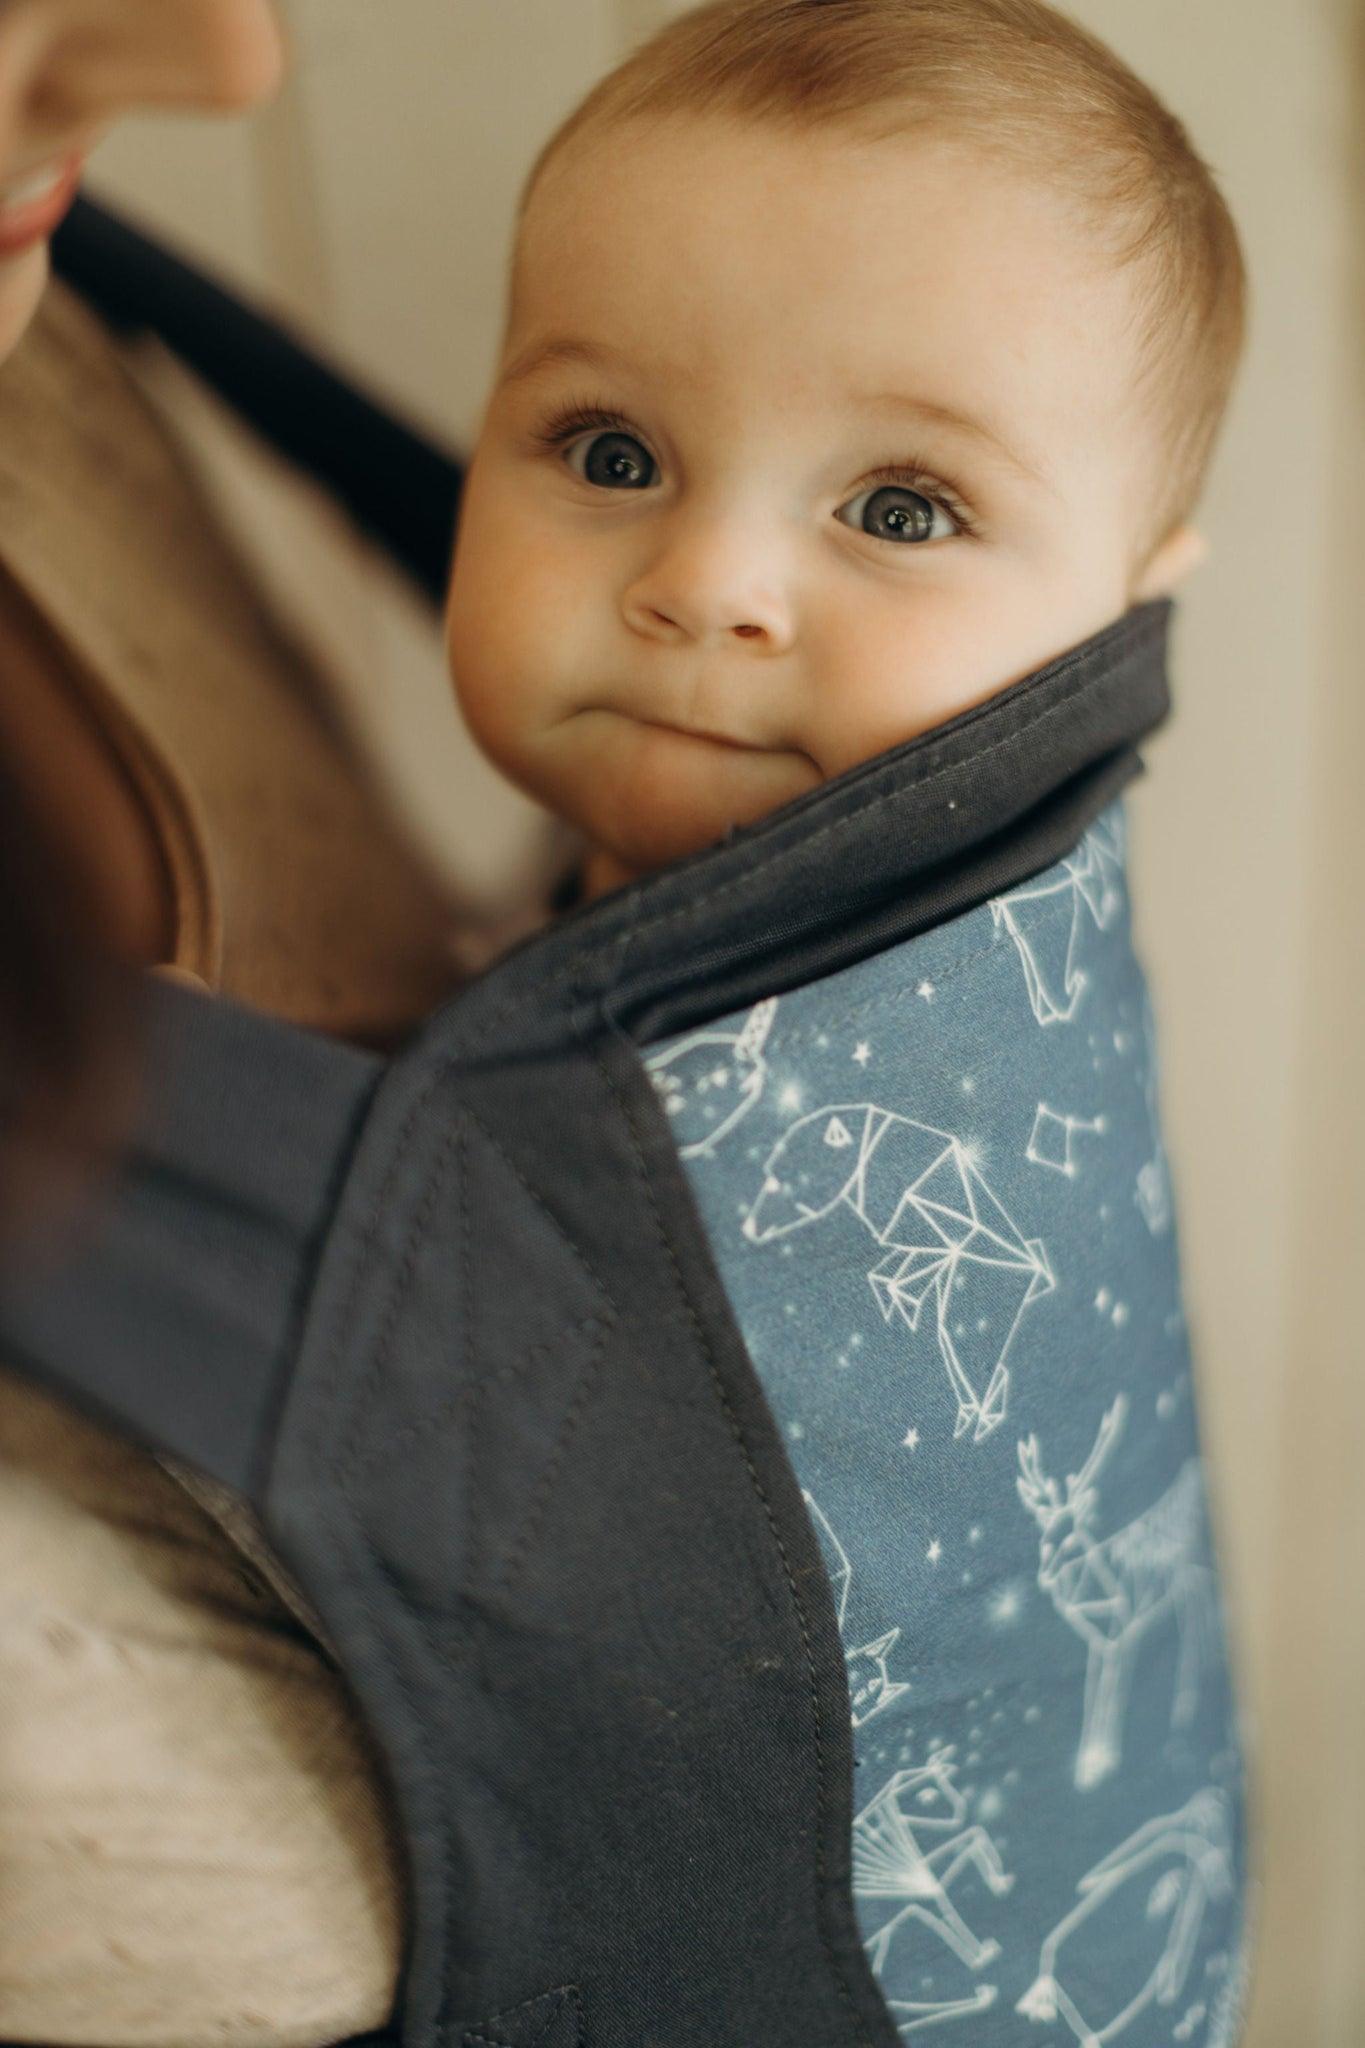 Boba classic baby carrier Constellation. Our streamlined soft structured baby carrier is designed to go and grow with your little one. This ergonomic front facing baby carrier is ready to use from infant to toddler.